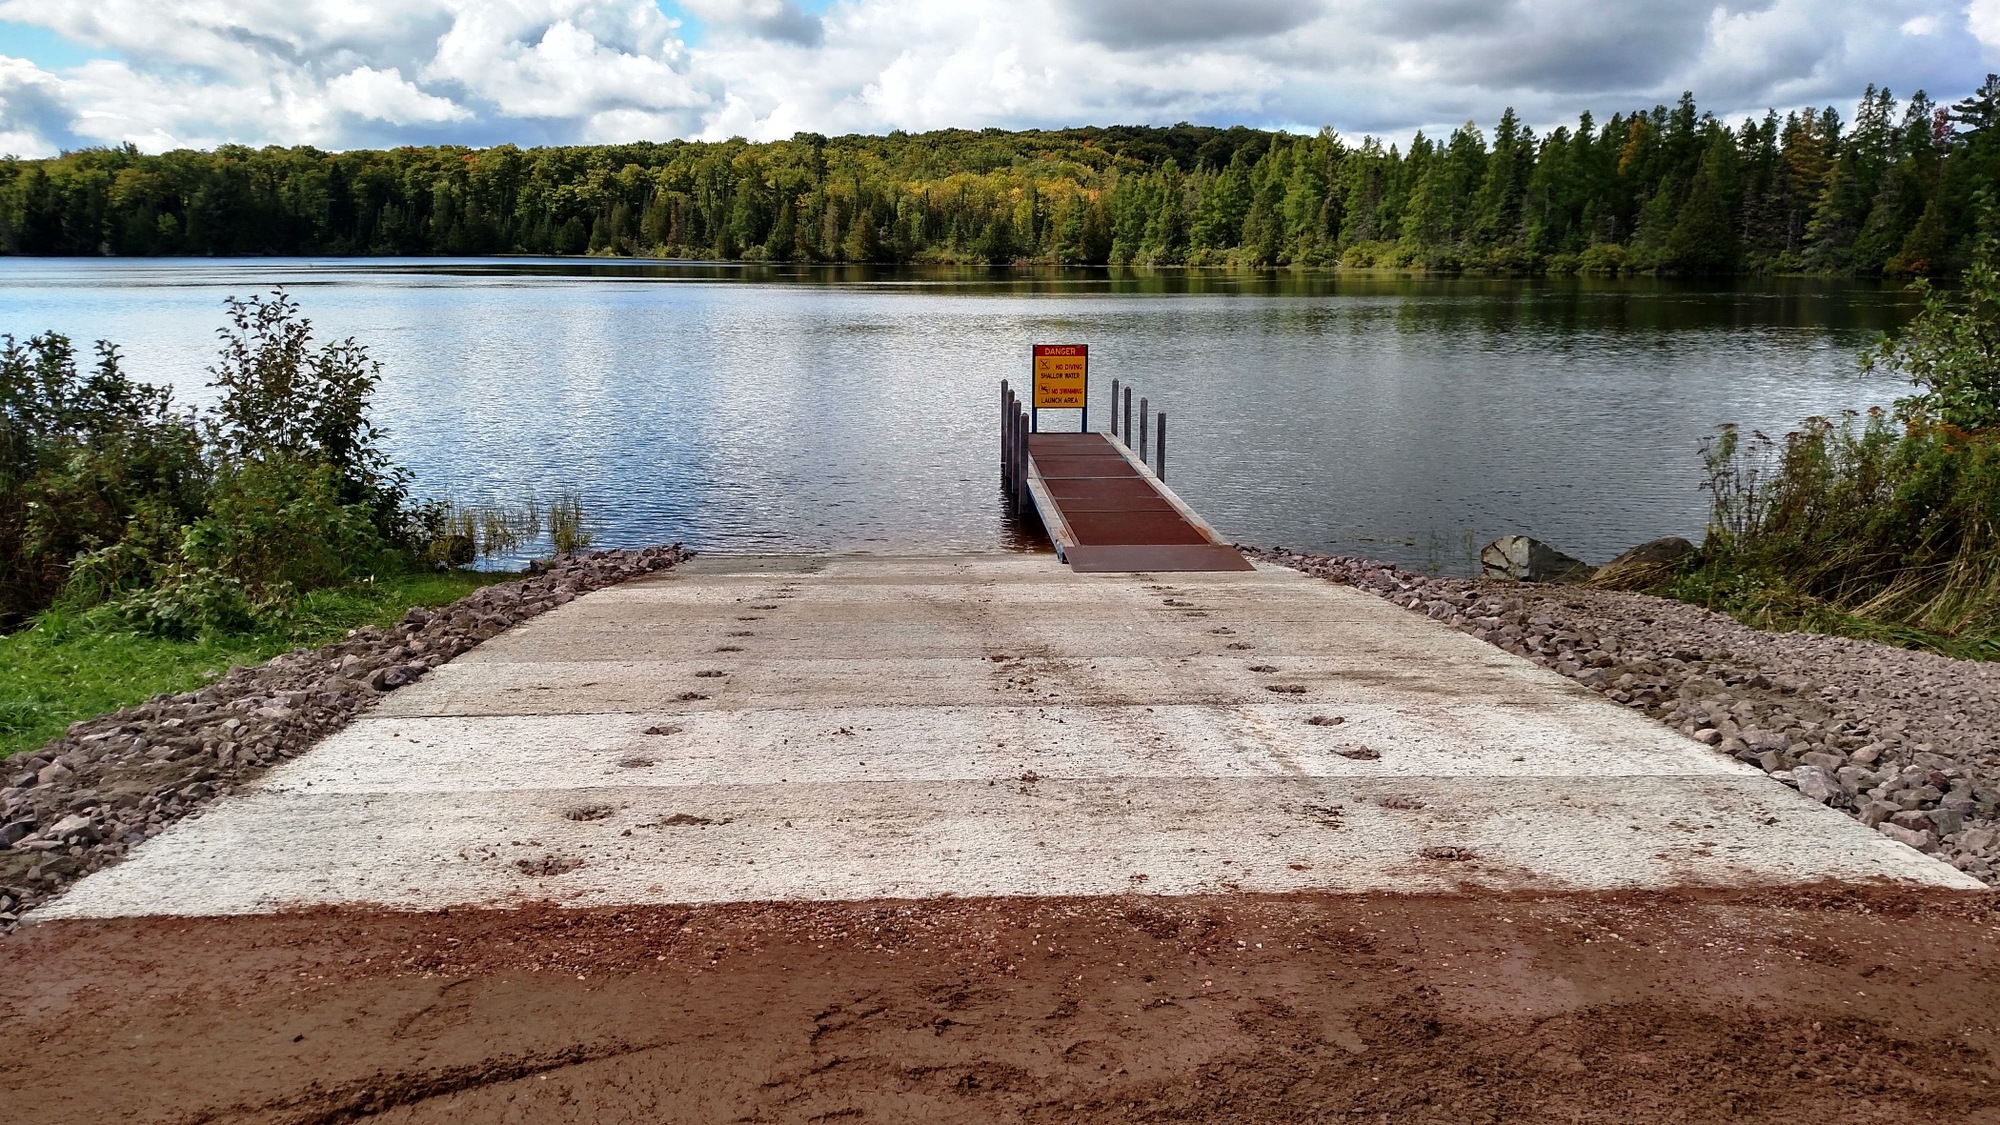 The newly-renovated boating access site at Parent Lake in Baraga County is shown.